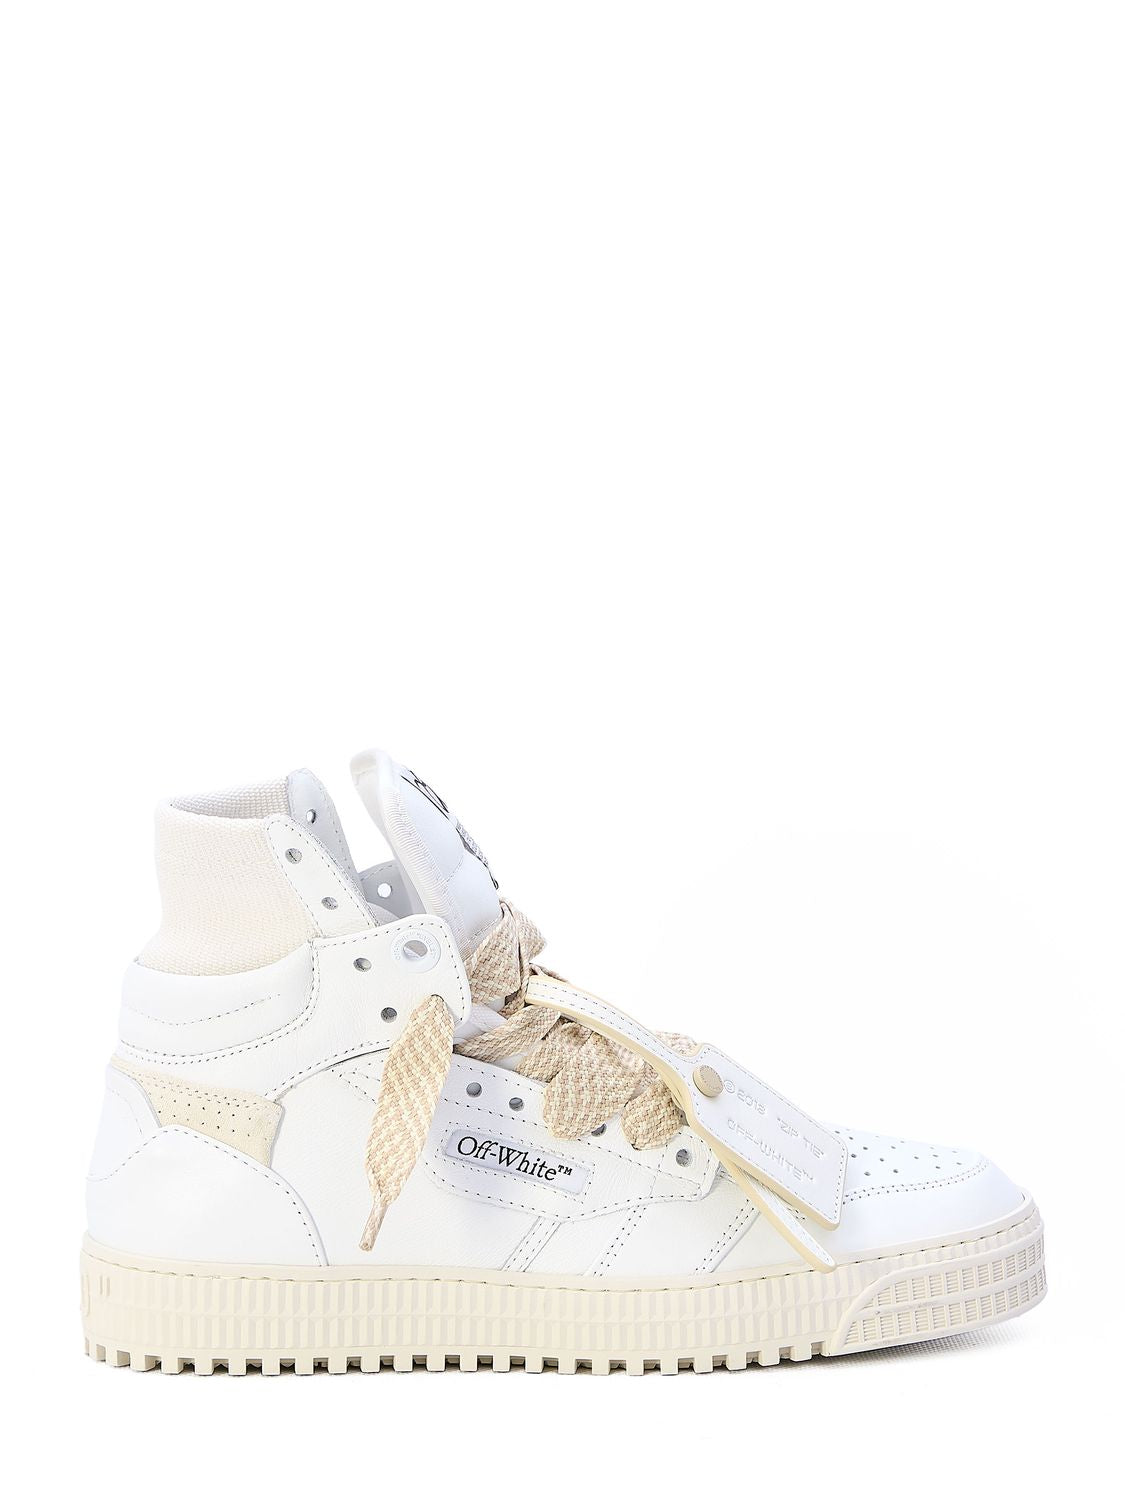 Men's White Leather Sneaker with Cream Rubber Sole and Detachable Zip-Tie Detail